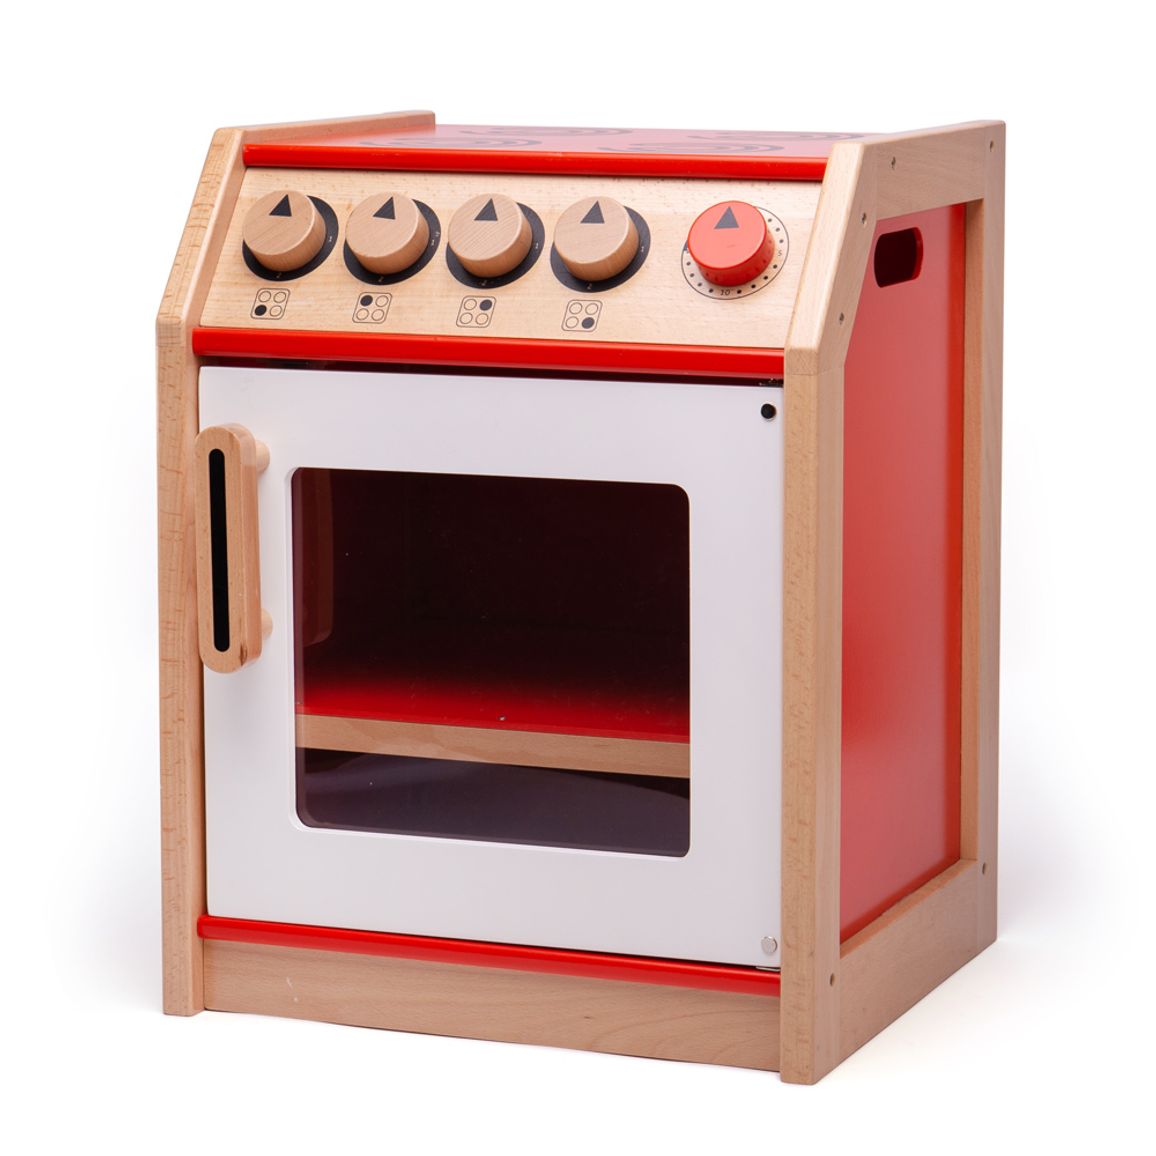 Tidlo Mini Chef Cooker, Budding young chefs can cook up a storm in this sturdy Kids Wooden Cooker from Tidlo. With clicking dials, hob detailing, an oven with a shelf, this play cooker is a realistic addition to any play kitchen. Using the view hole, children can make sure their toy food doesn't burn! The door features a magnetic stopper. Compatible with Tidlo Cookware Sets (sold separately). A great way to teach children about kitchen safety and how we cook different foods. Features carry handles and encou